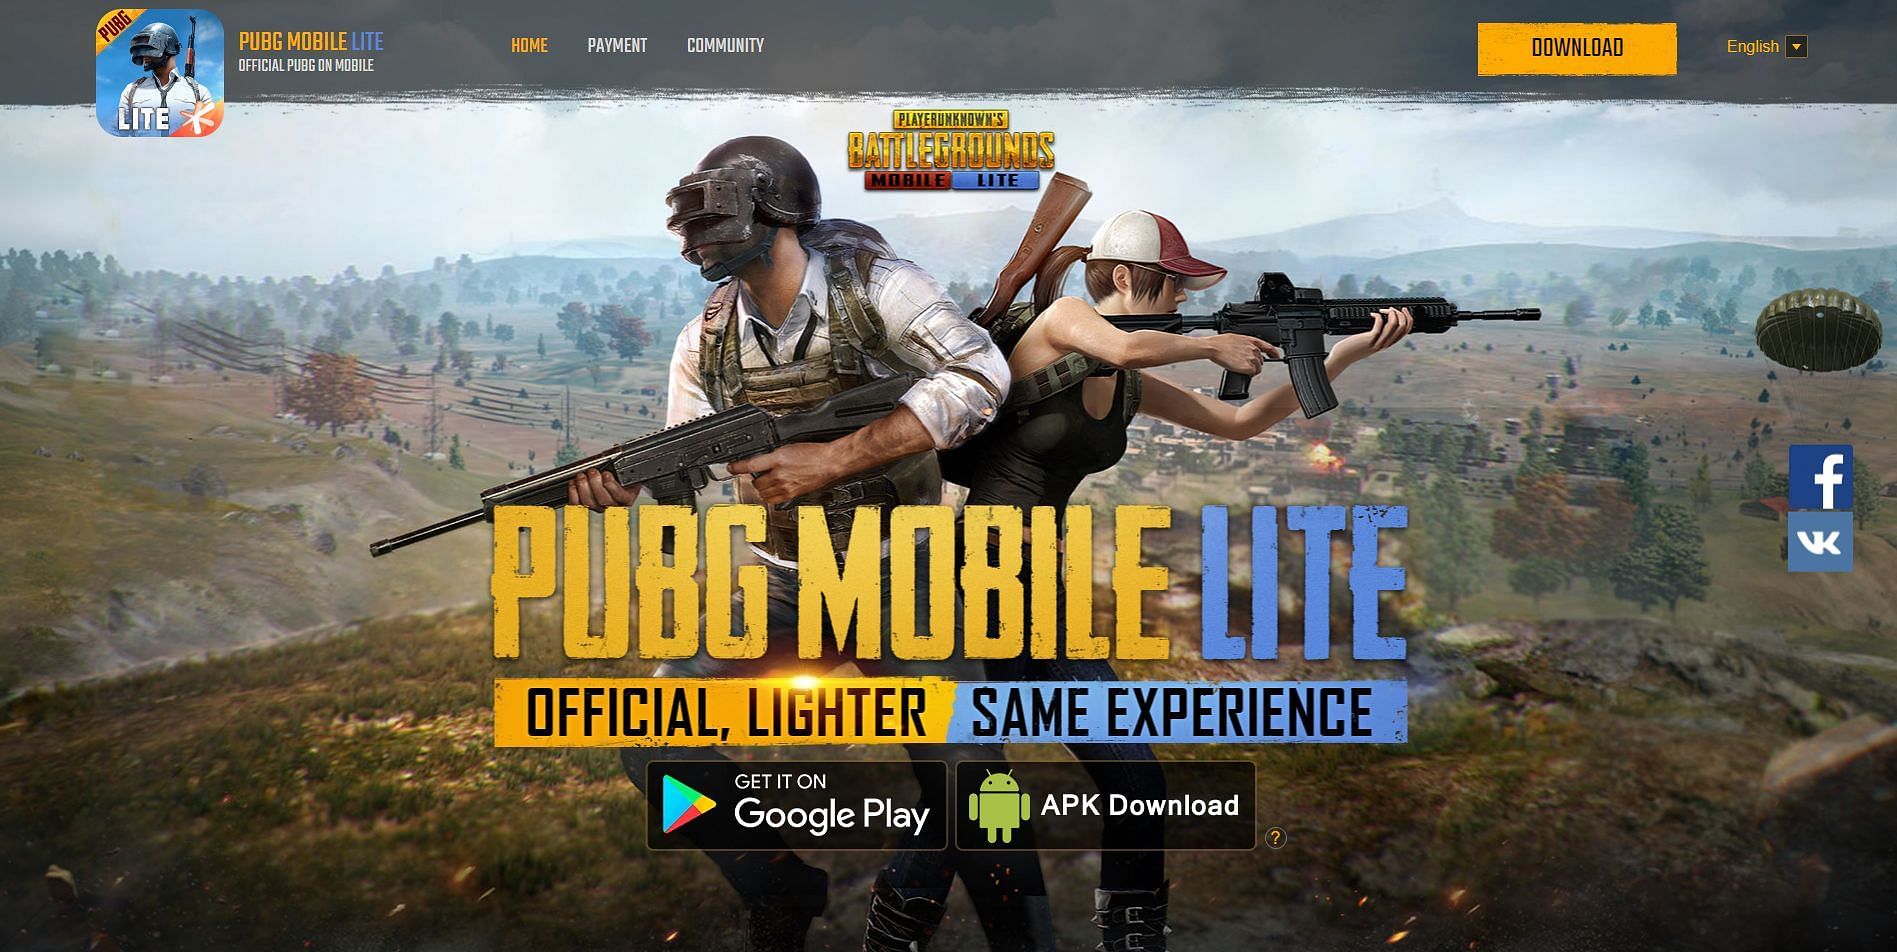 Click on the APK download button to get the 0.24.0 APK file (Image via Garena)